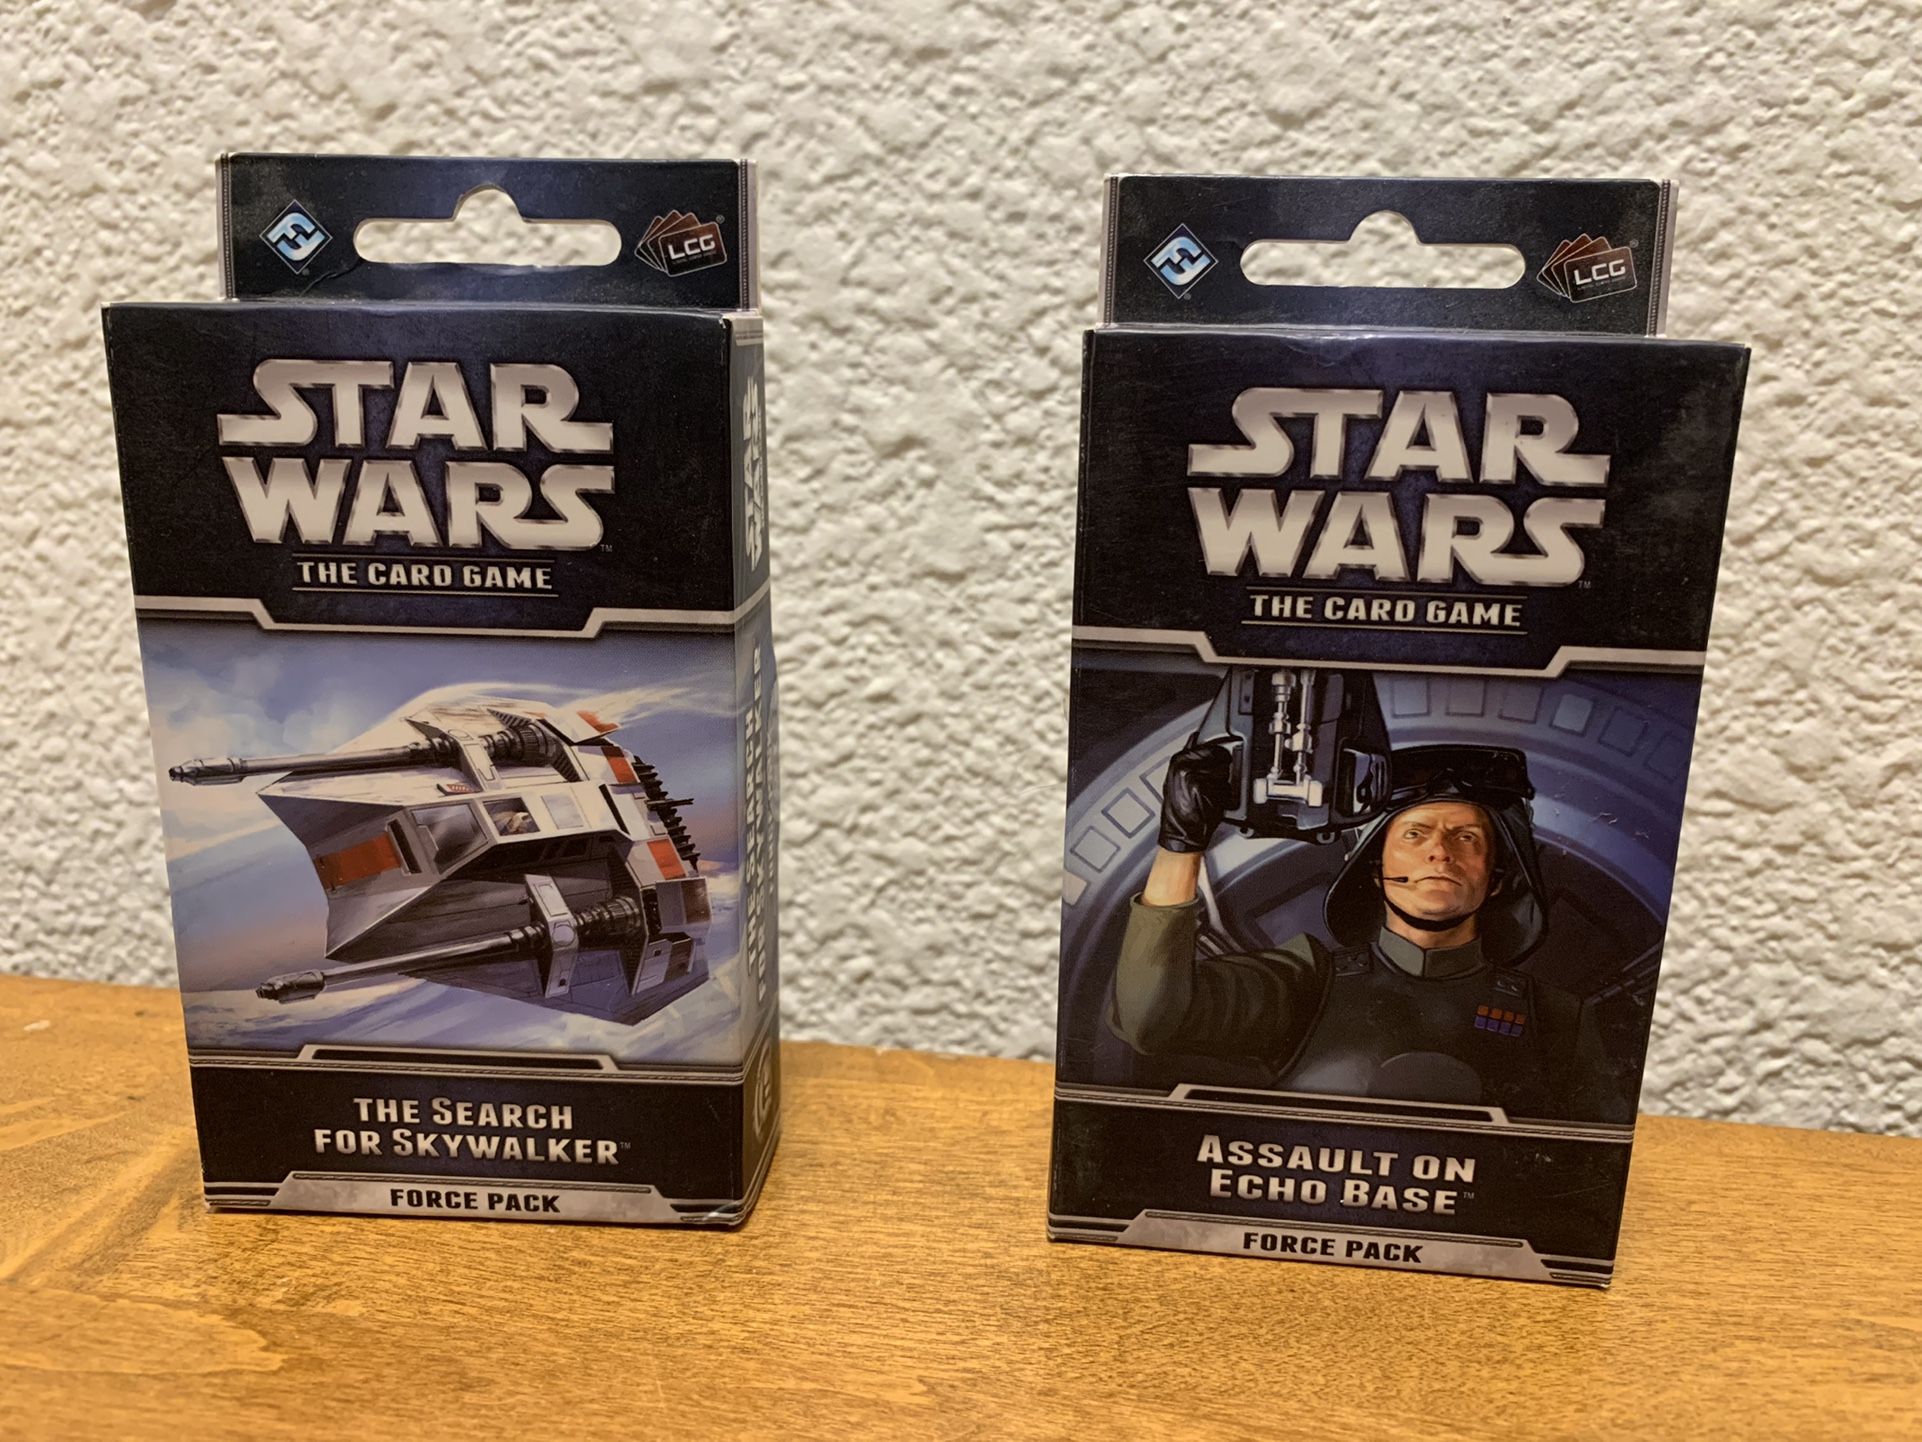 Star Wars the card game booster packs